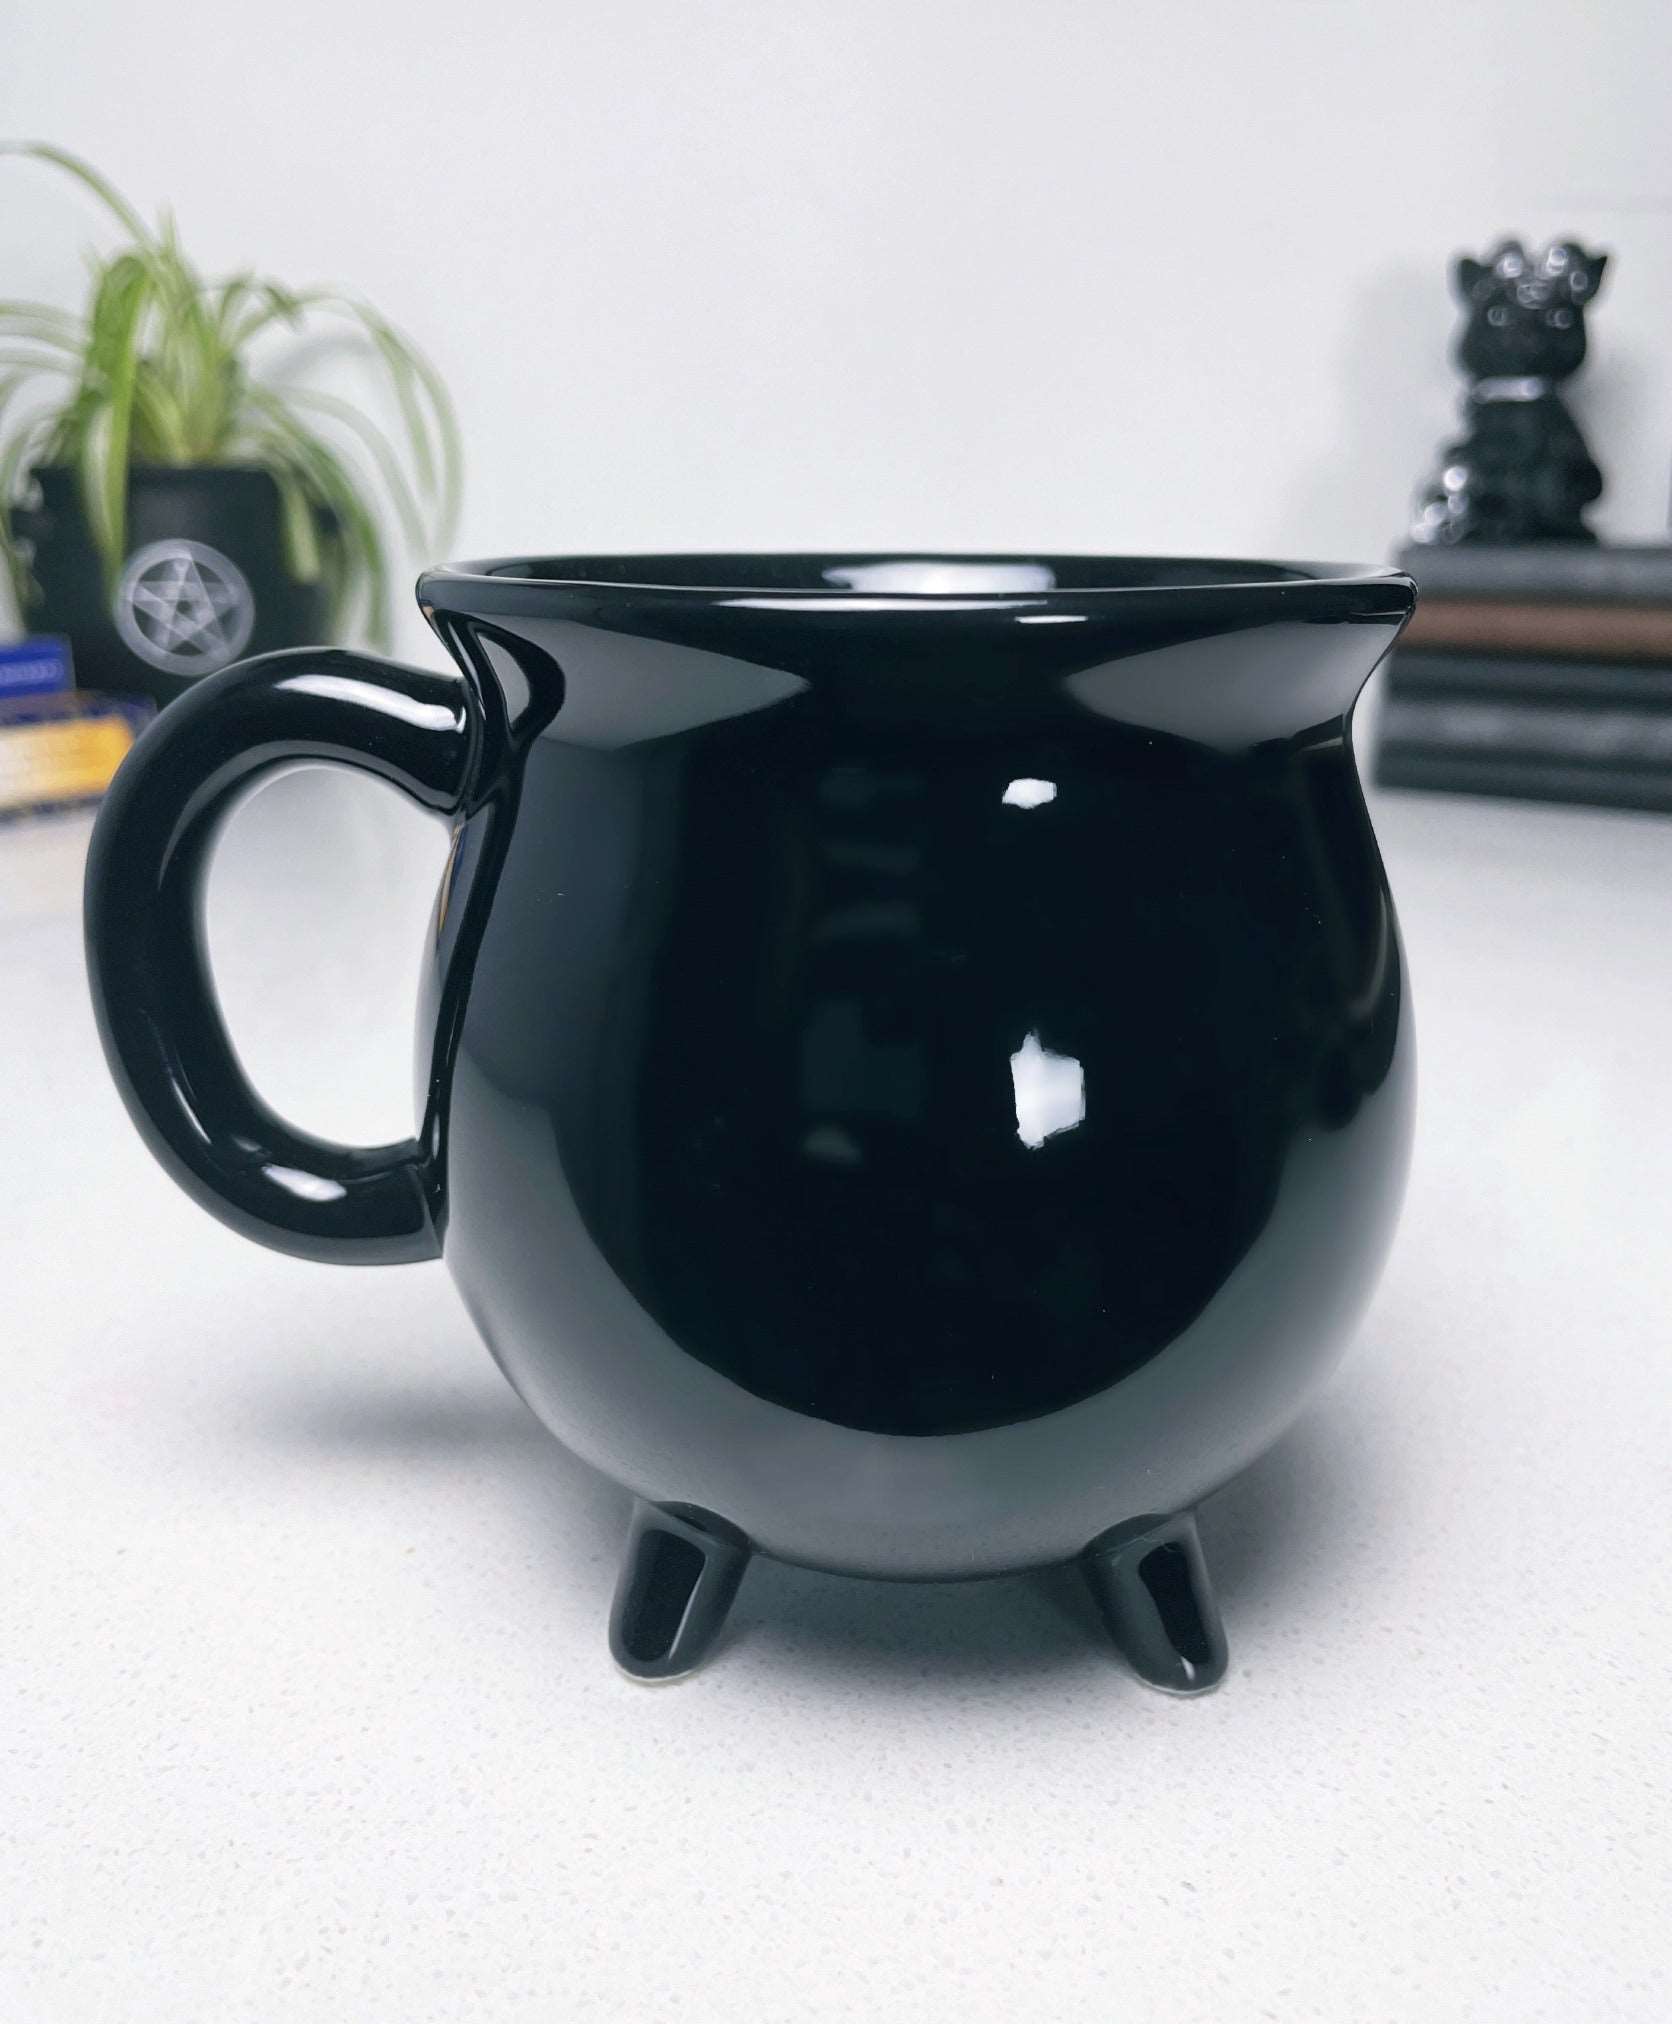 Pictured is a black ceramic mug in the shape of a cauldron.